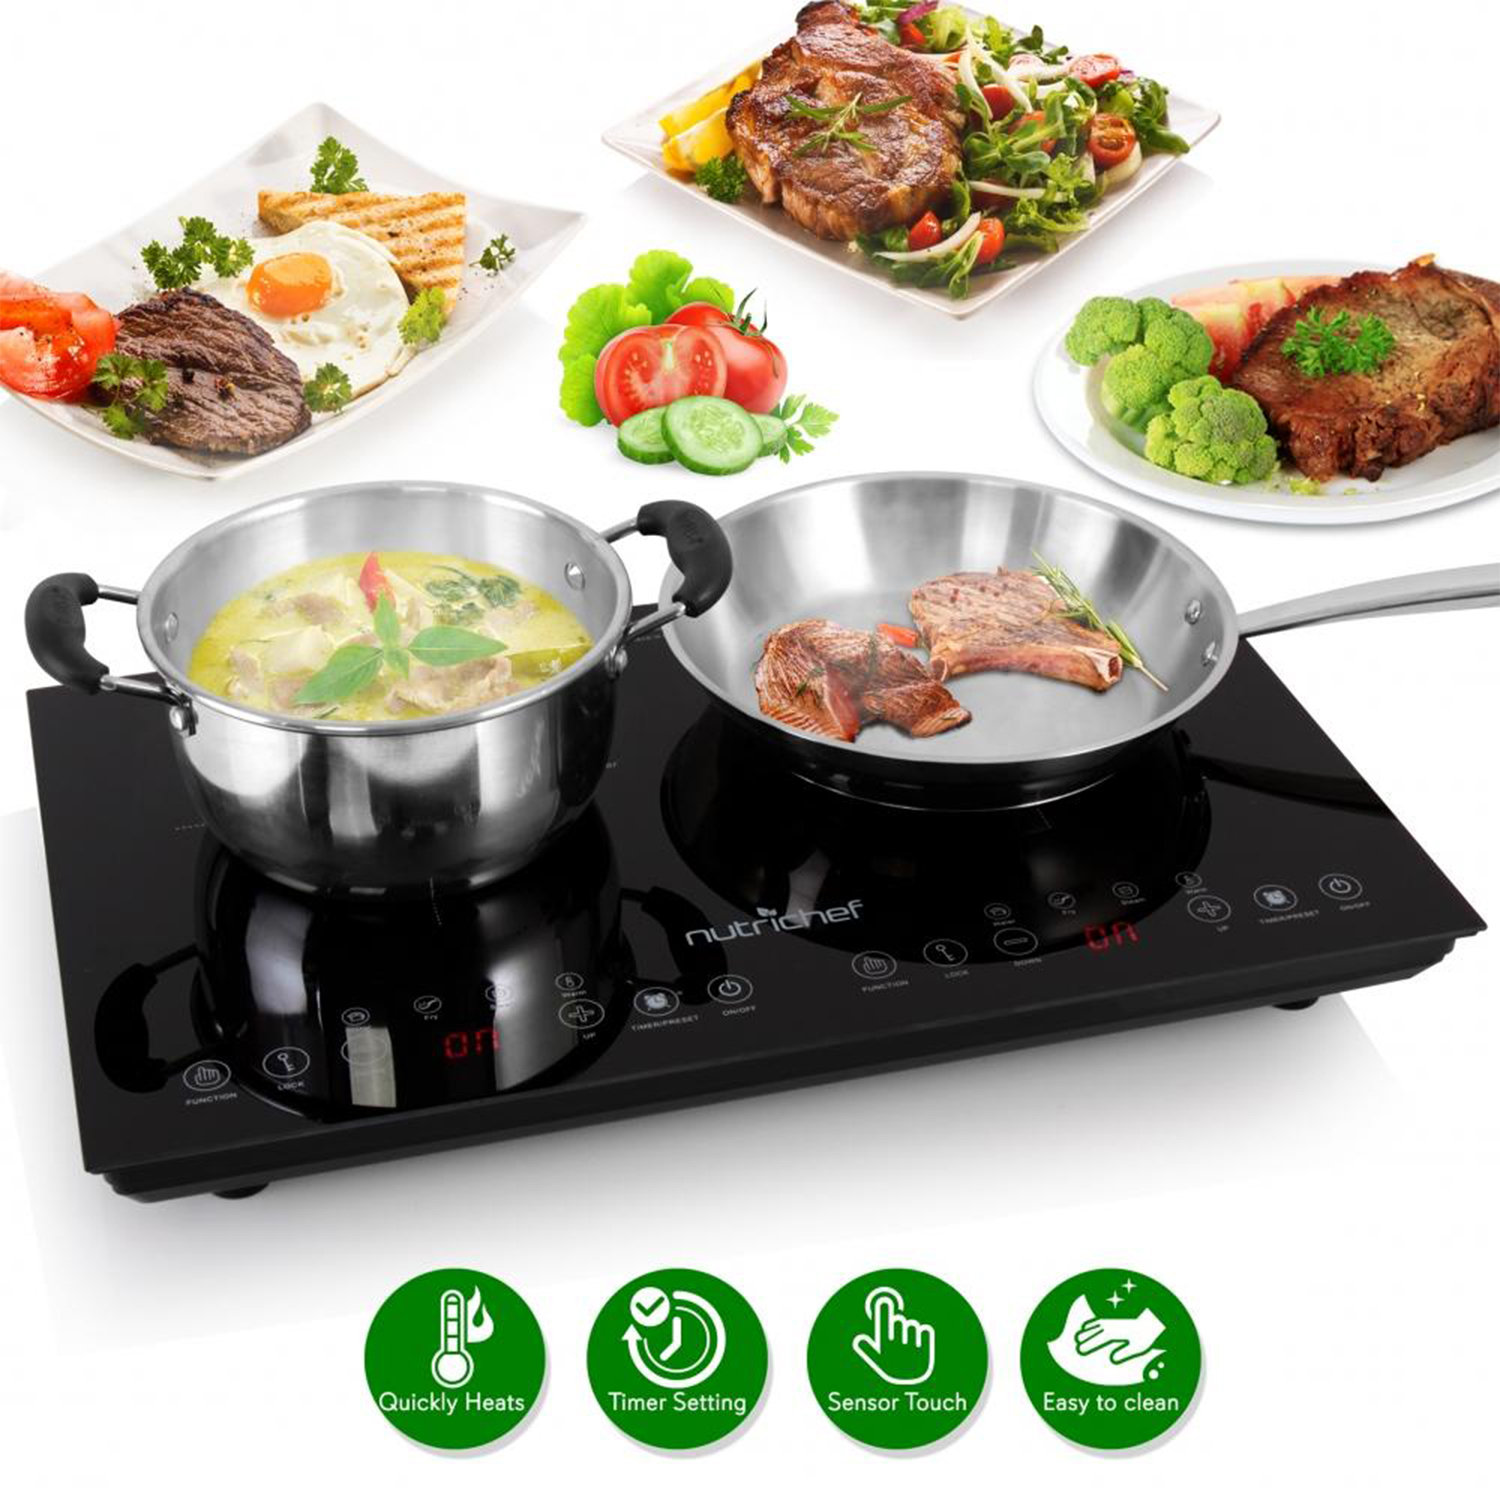 NuWave PIC Double Induction Cooktop